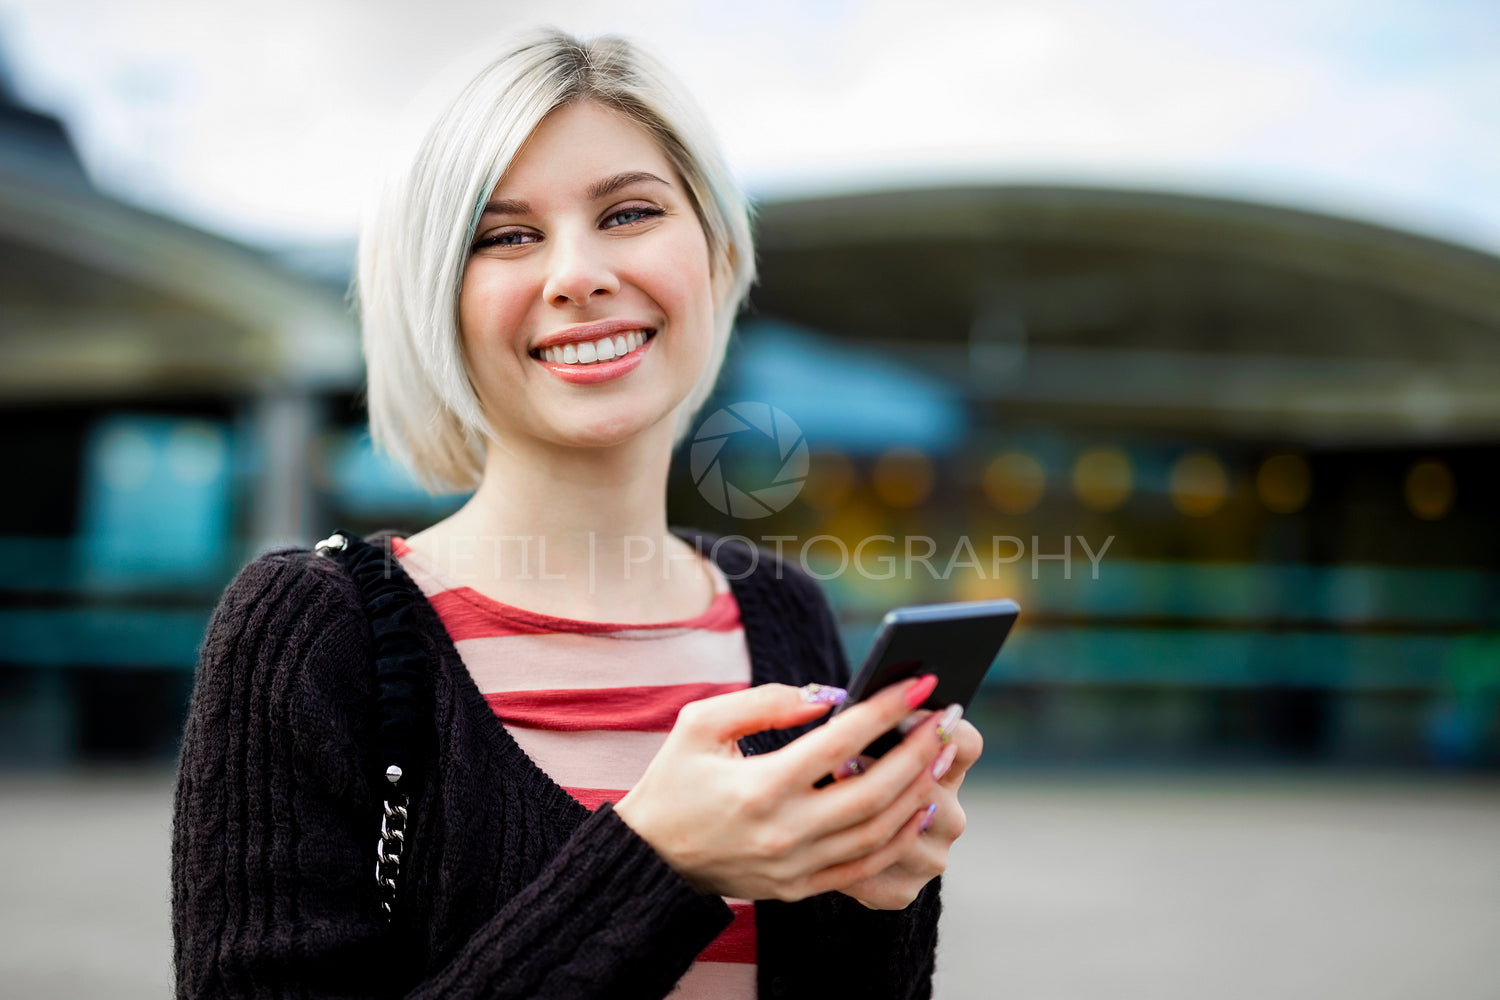 Woman Smiling While Using Mobile Phone Outside Train Station